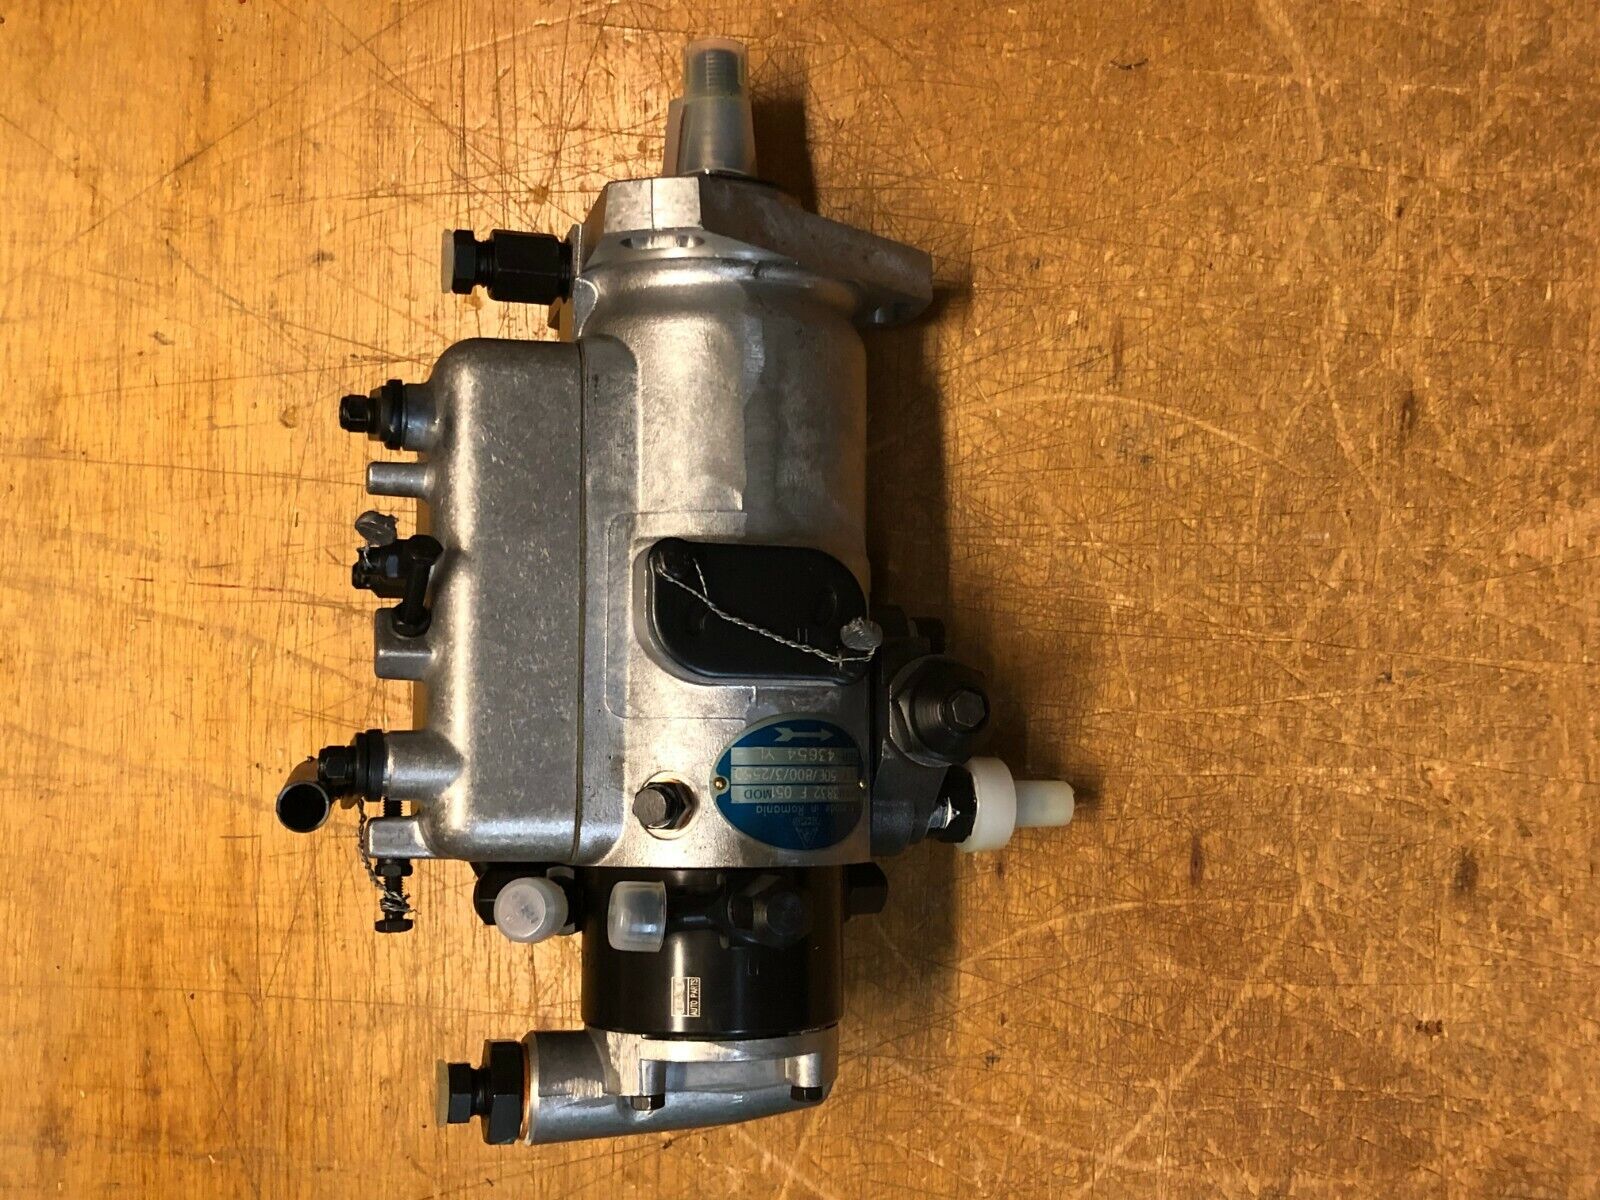 TX15804 INJECTION PUMP FOR 550, 560, 610, 2610 LONG TRACTORS